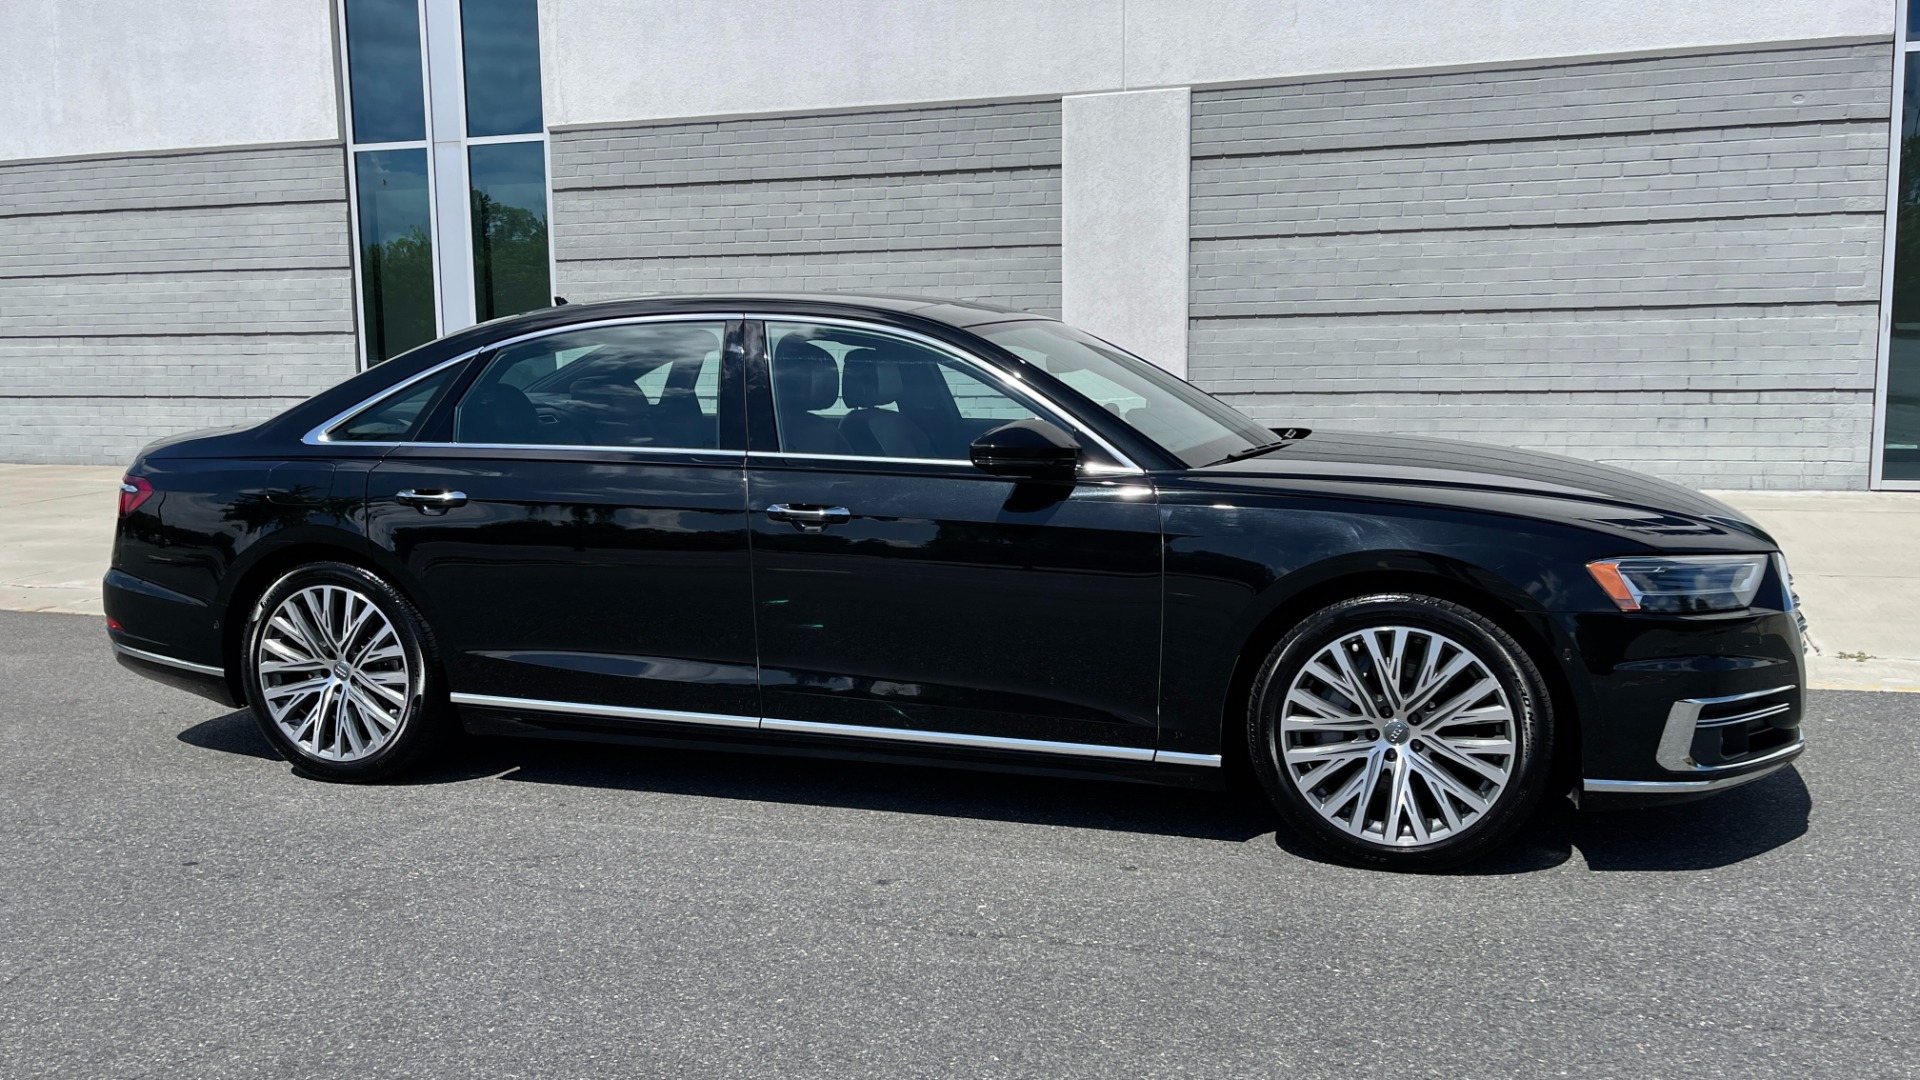 Used 2019 Audi A8L 20IN WHEELS / DRIVER ASSIST / COLD WEATHER / EXECUTIVE PACKAGE for sale $53,995 at Formula Imports in Charlotte NC 28227 5